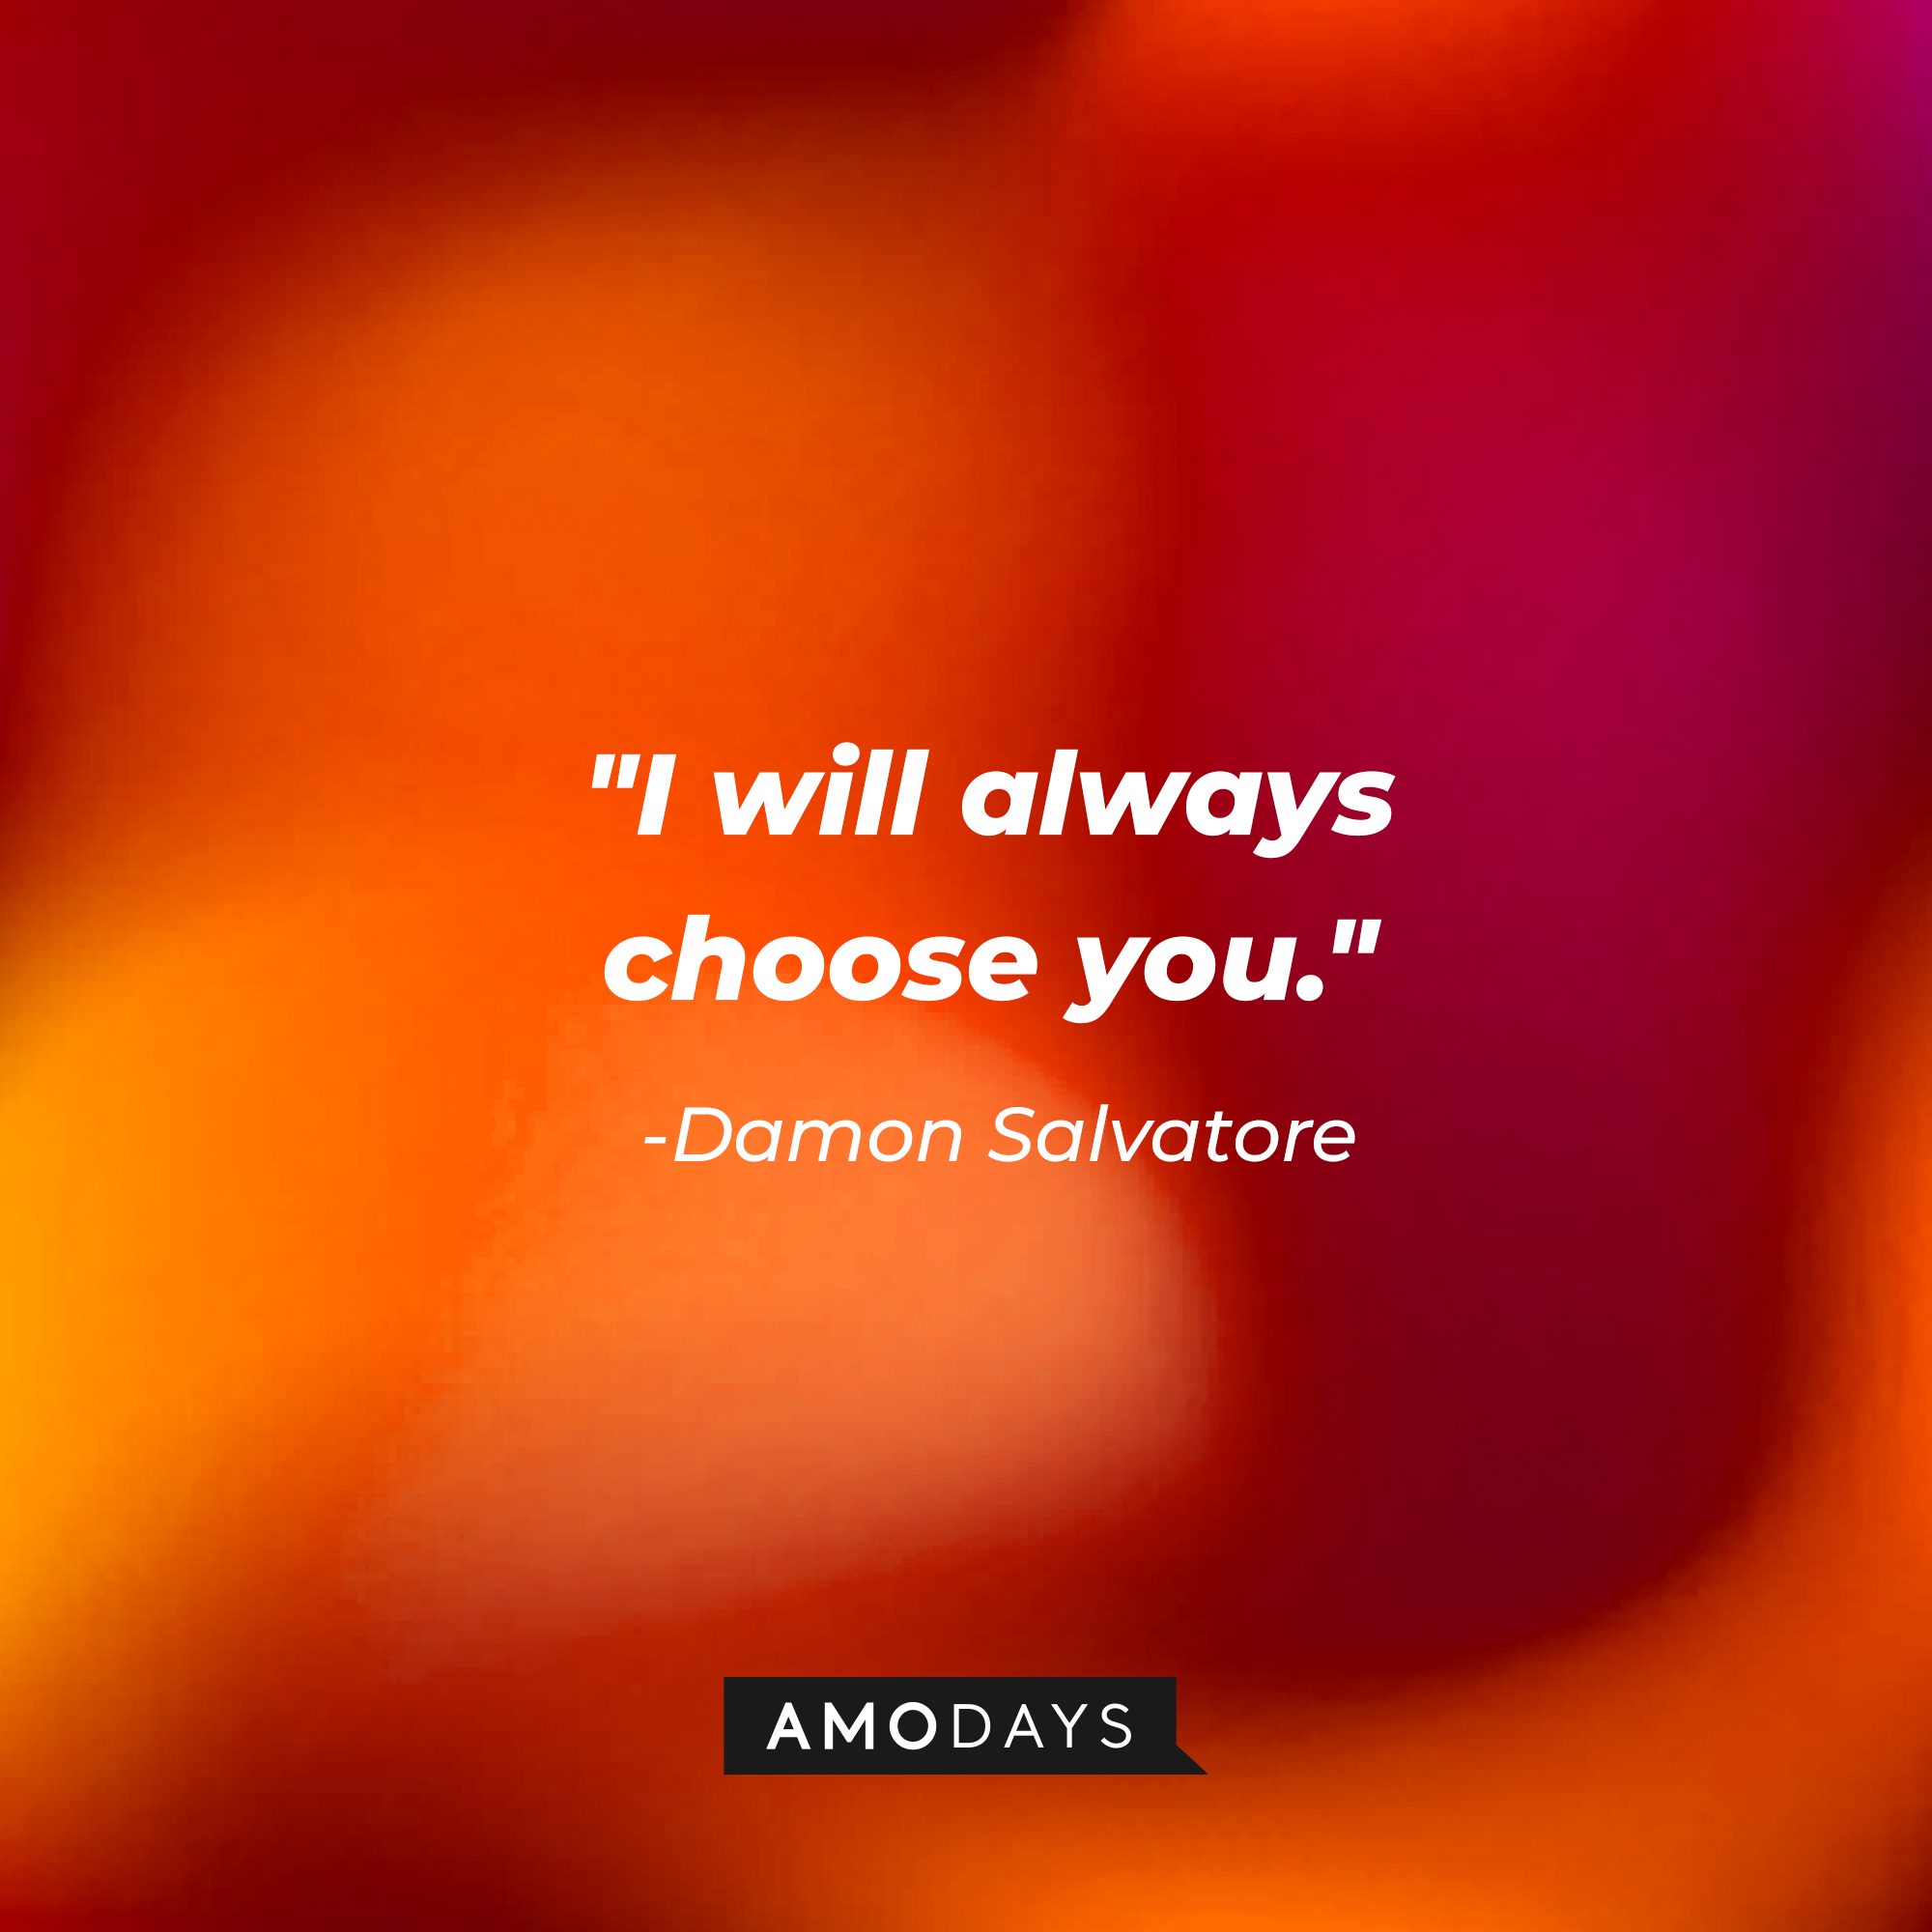 Damon Salvatore's quote: "I will always choose you." | Source: AmoDays